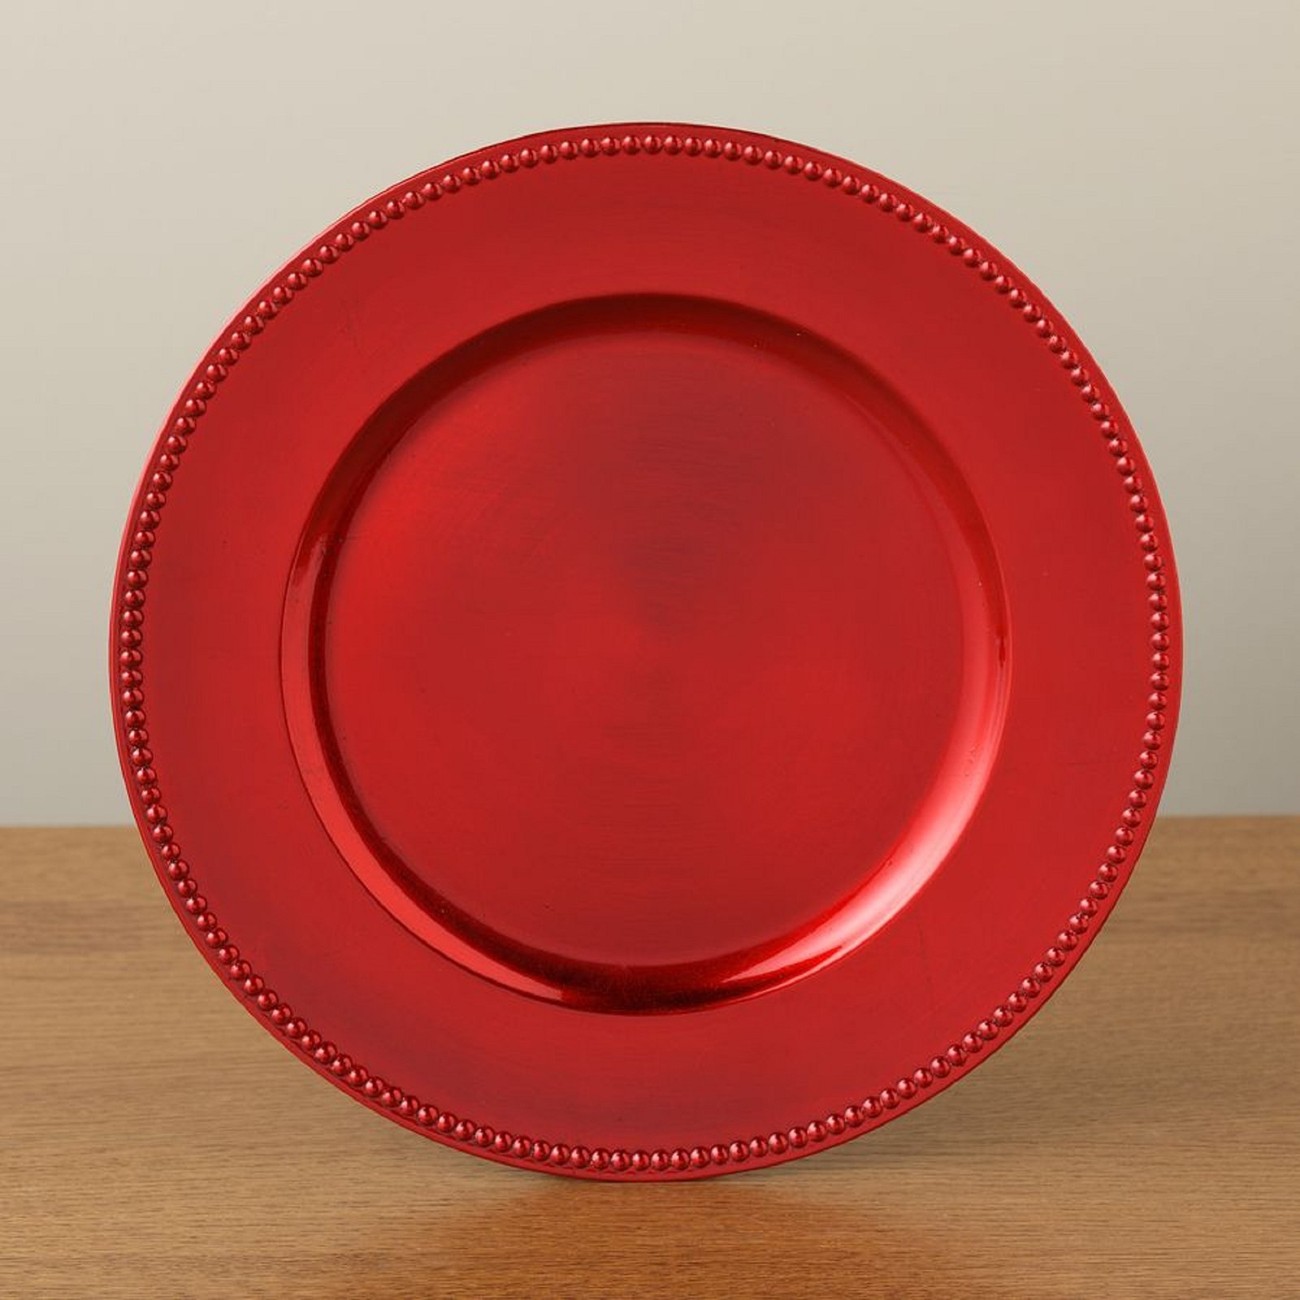 Primary image for ELEGANT HOLIDAY  CHARGER  PLATES  IN RED, GOLD(NEW)